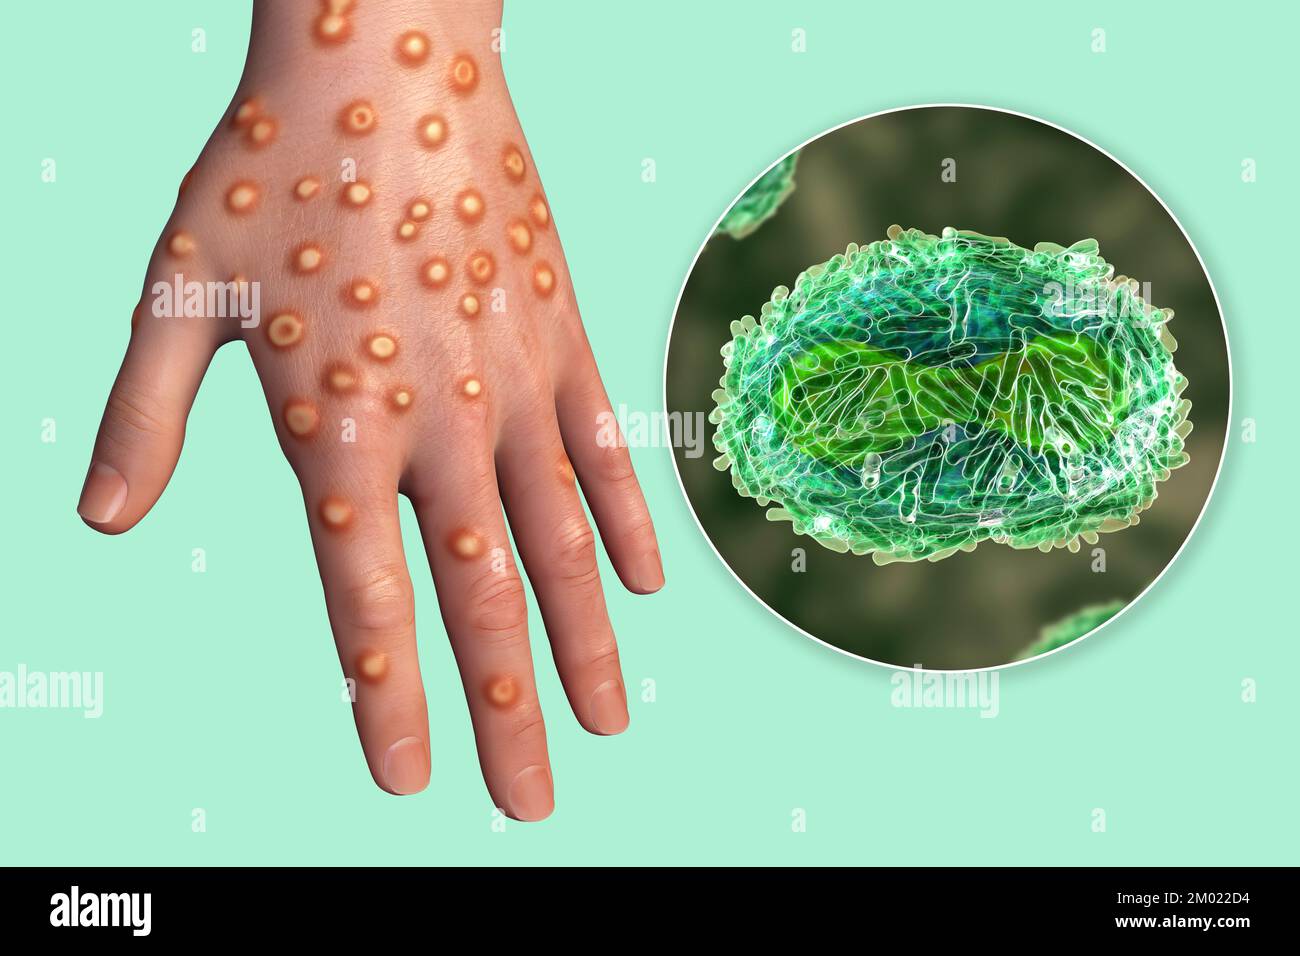 Hand of a patient with monkeypox infection and close-up view of monkeypox virus particles, computer illustration. Monkeypox is a zoonotic virus from t Stock Photo